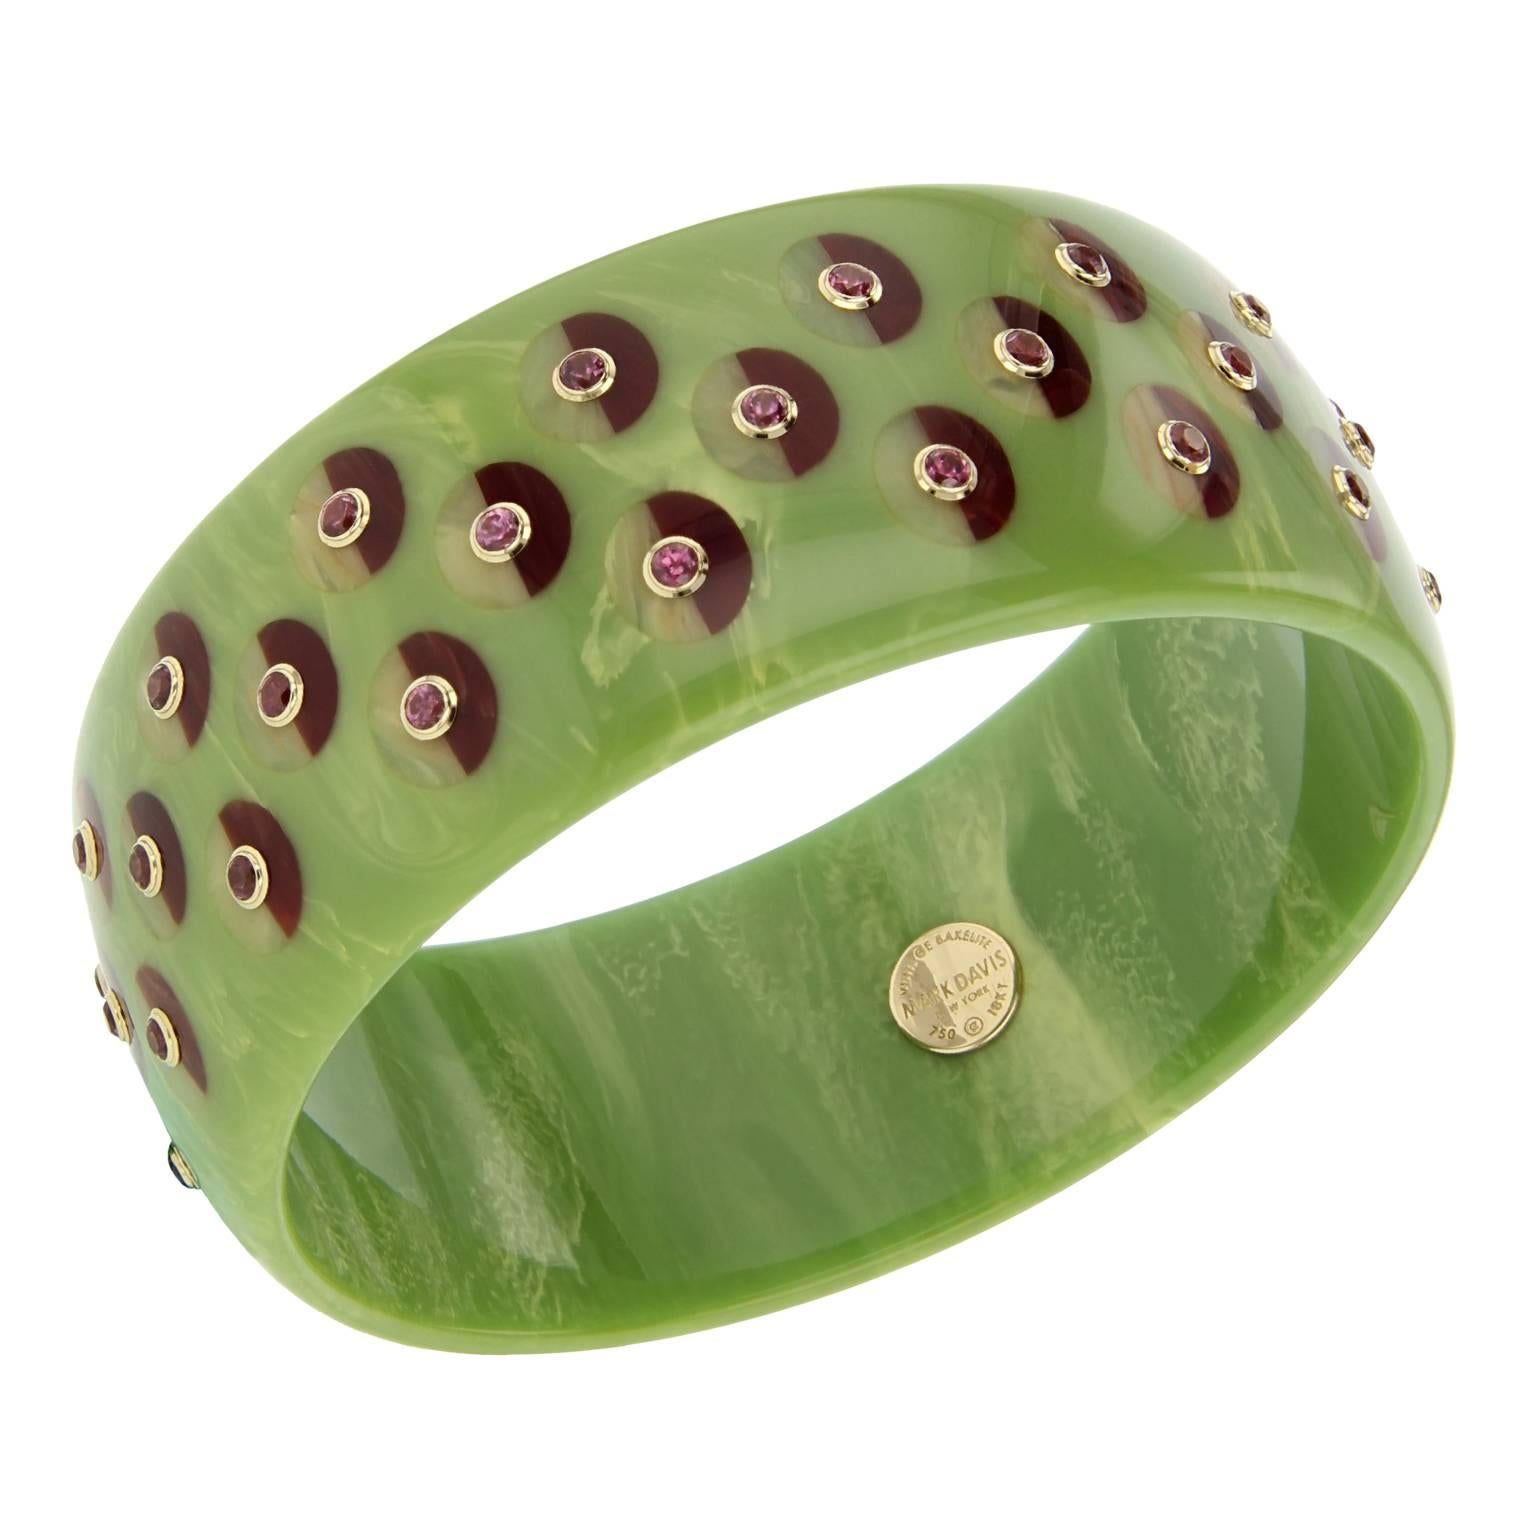 This Mark Davis bangle was handcrafted using marbled green vintage bakelite.  Precisely inlaid with a circular motif of half burgundy and beige bakelite pieces. Studded with rhodolite garnet bezel-set in 18k yellow gold.

Full details below: 
• From